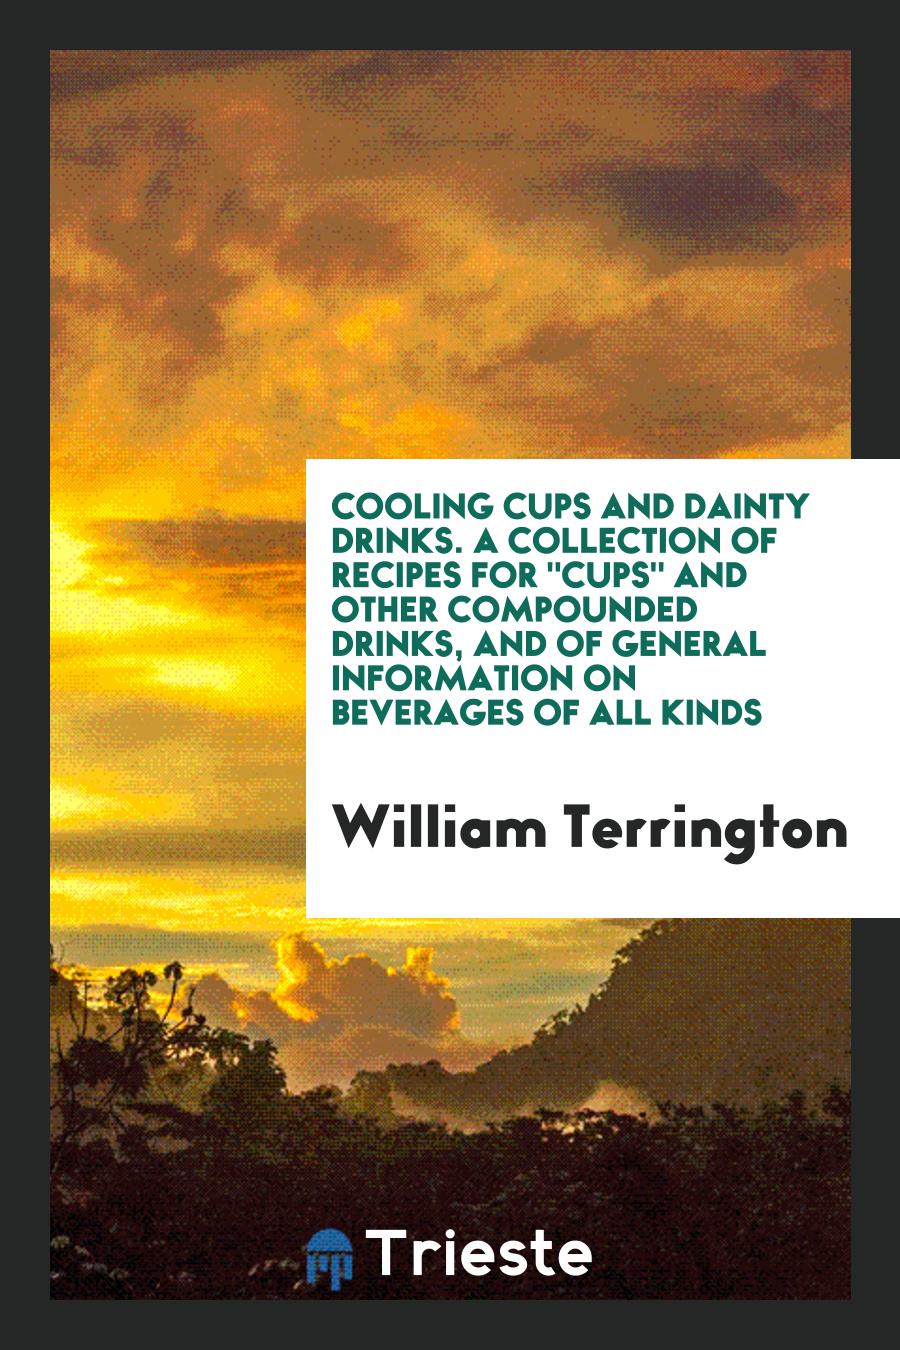 William Terrington - Cooling Cups and Dainty Drinks. A Collection of Recipes For "Cups" and Other Compounded Drinks, and of General Information on Beverages of All Kinds